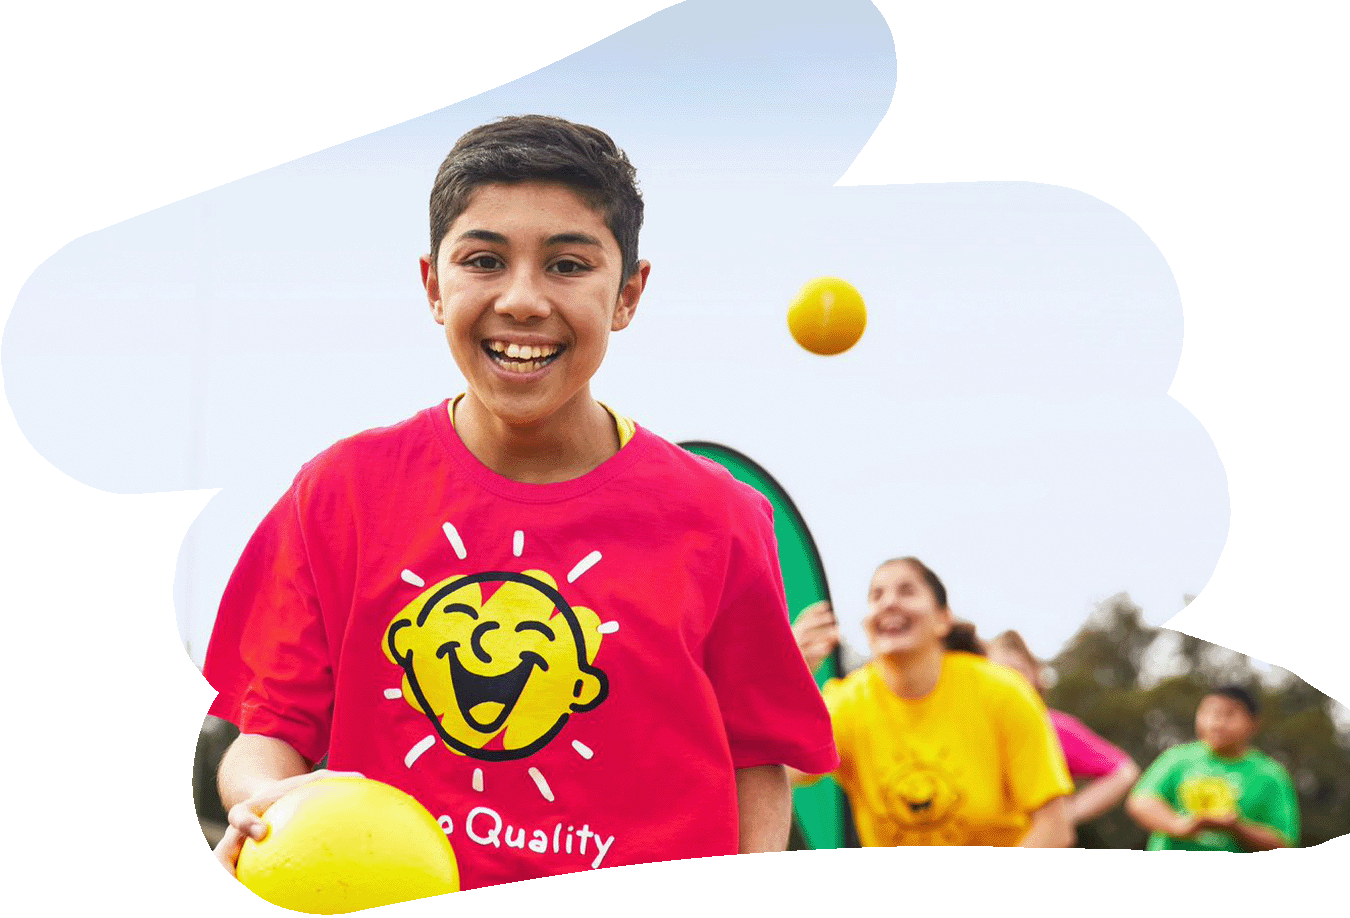 Child in pink Camp Quality shirt smiling while holding a yellow ball